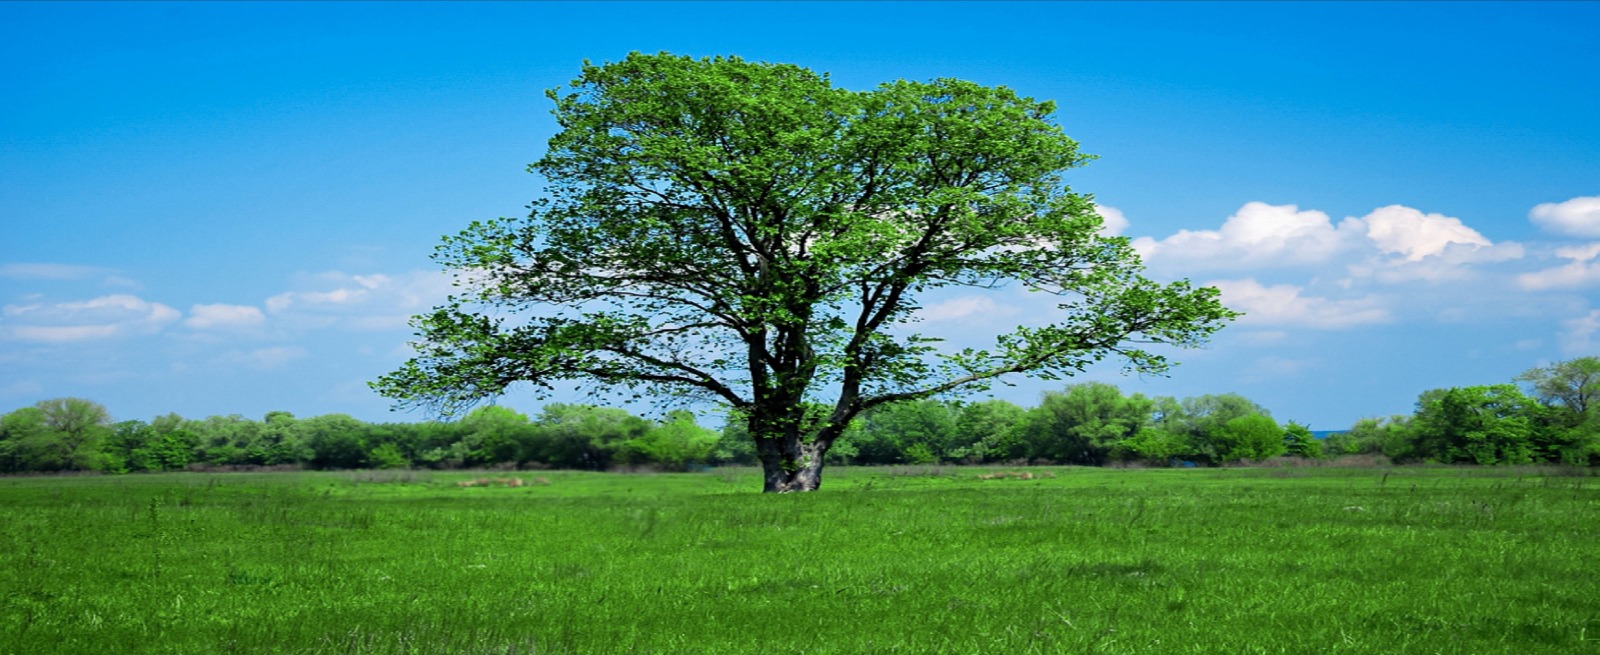 a tree in the grass